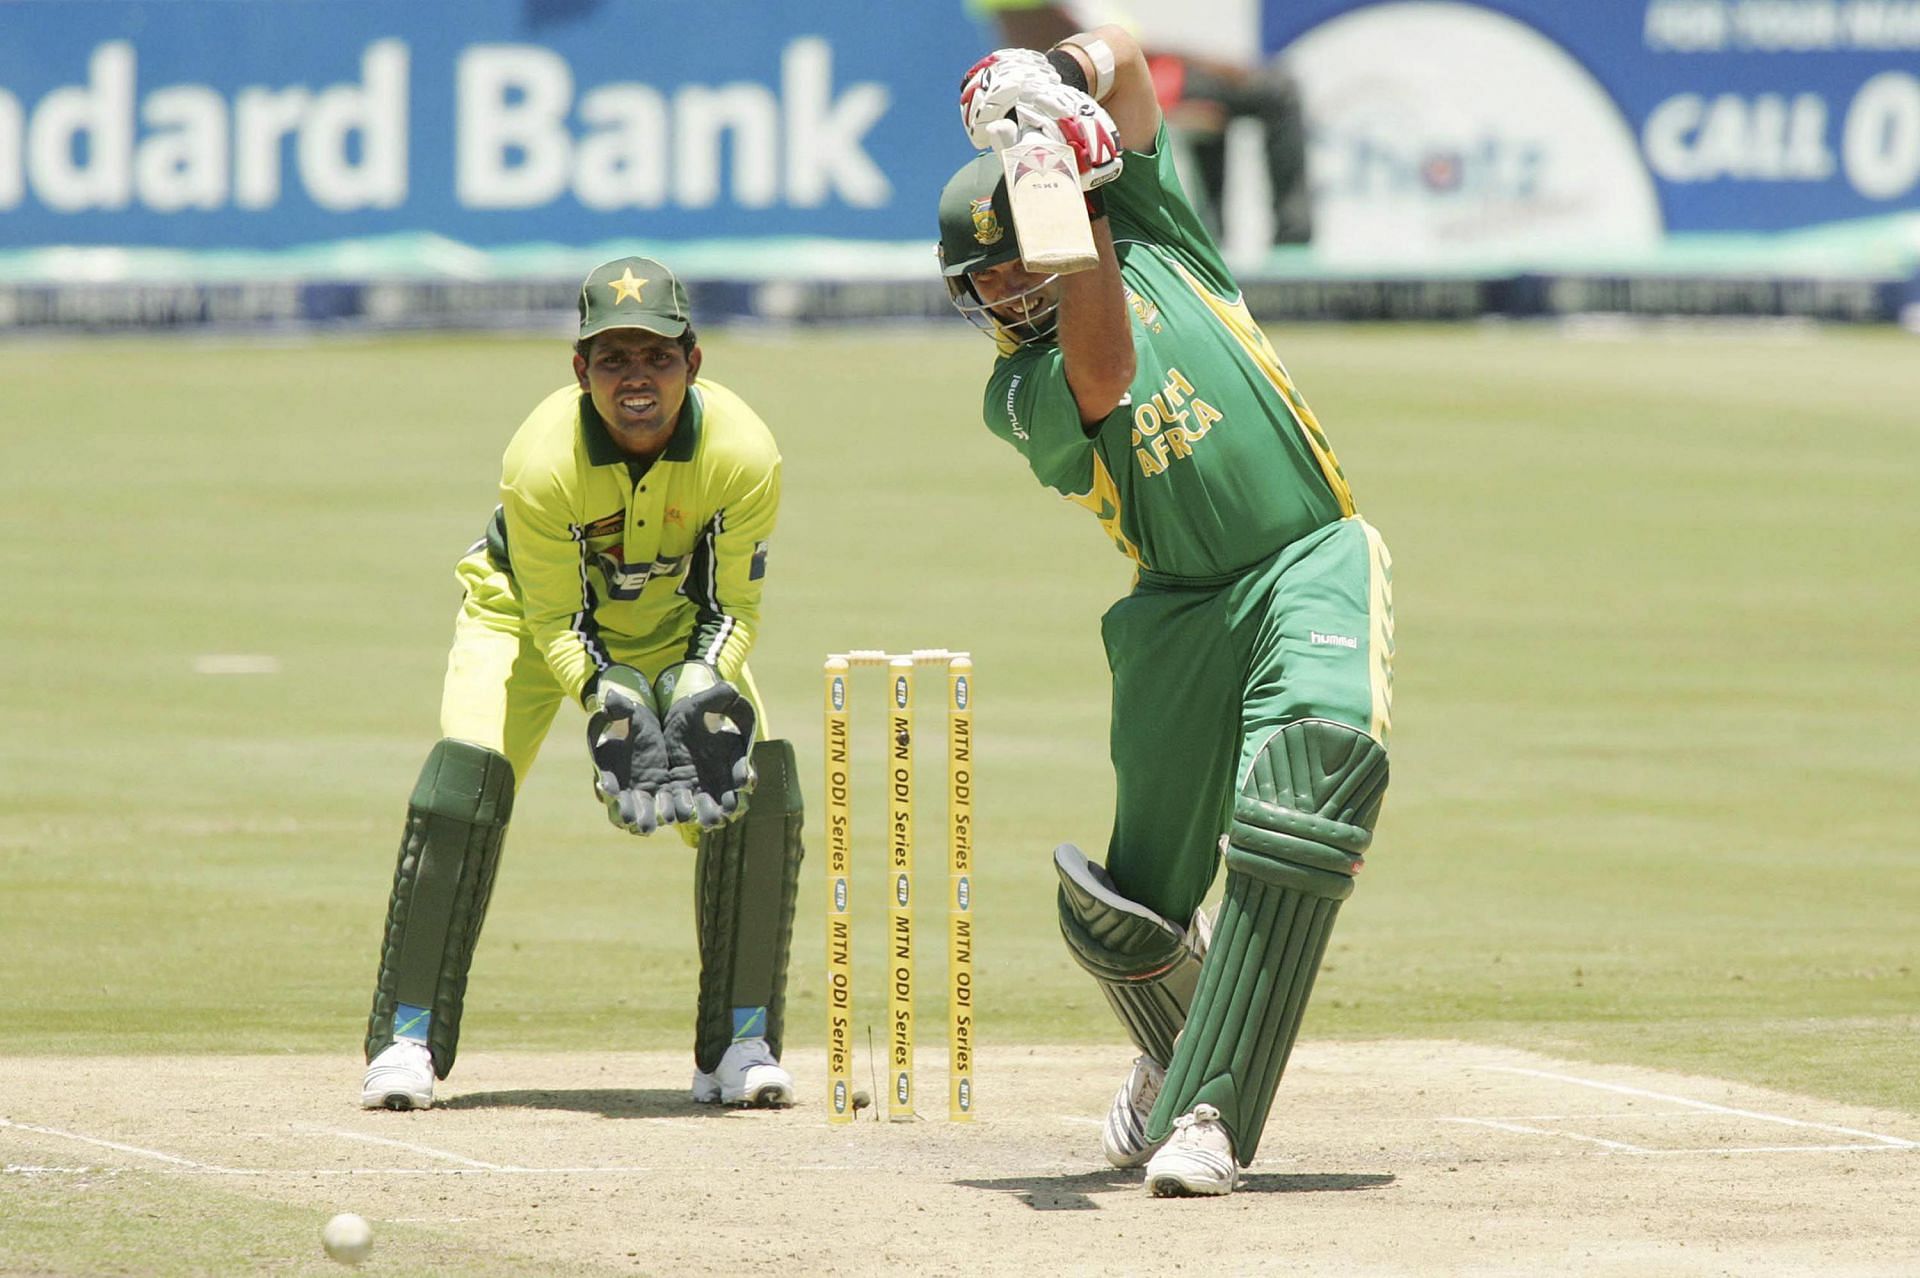 Jacques Kallis during the 1st ODI Match South Africa v Pakistan 2007 [Getty Images]